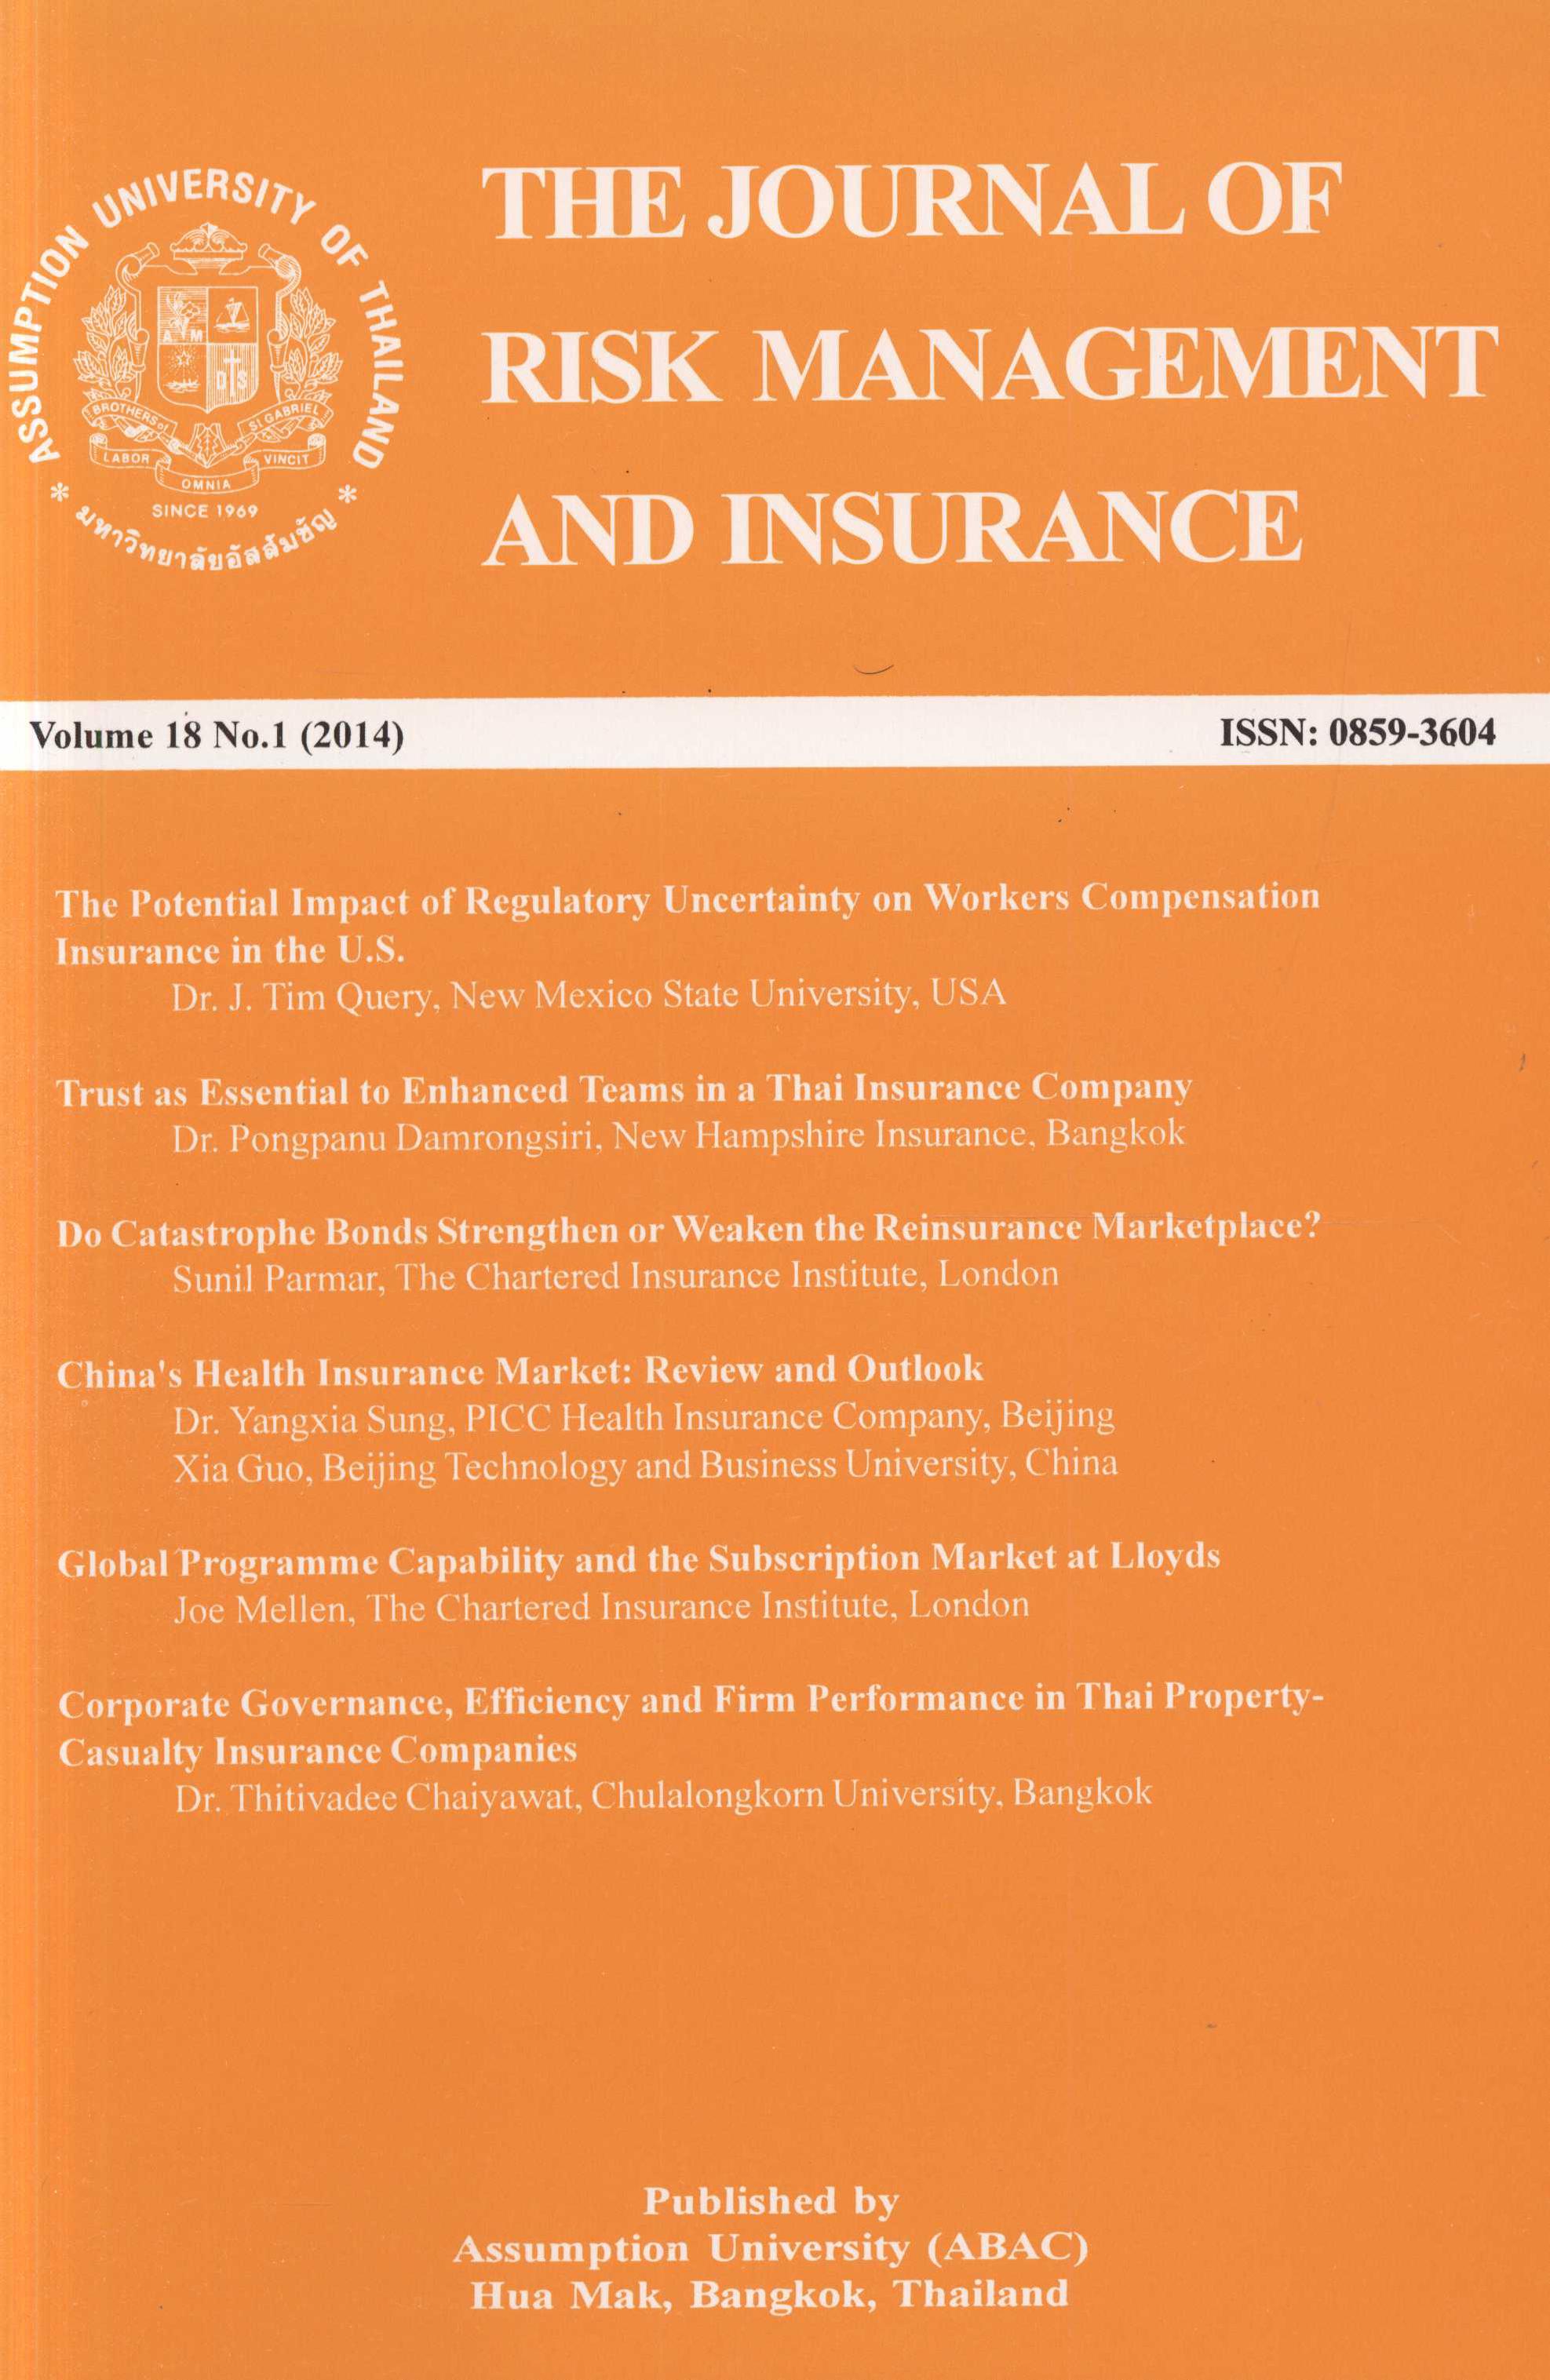 					View Vol. 18 No. 1 (2014): The Journal of Risk Management and Insurance
				